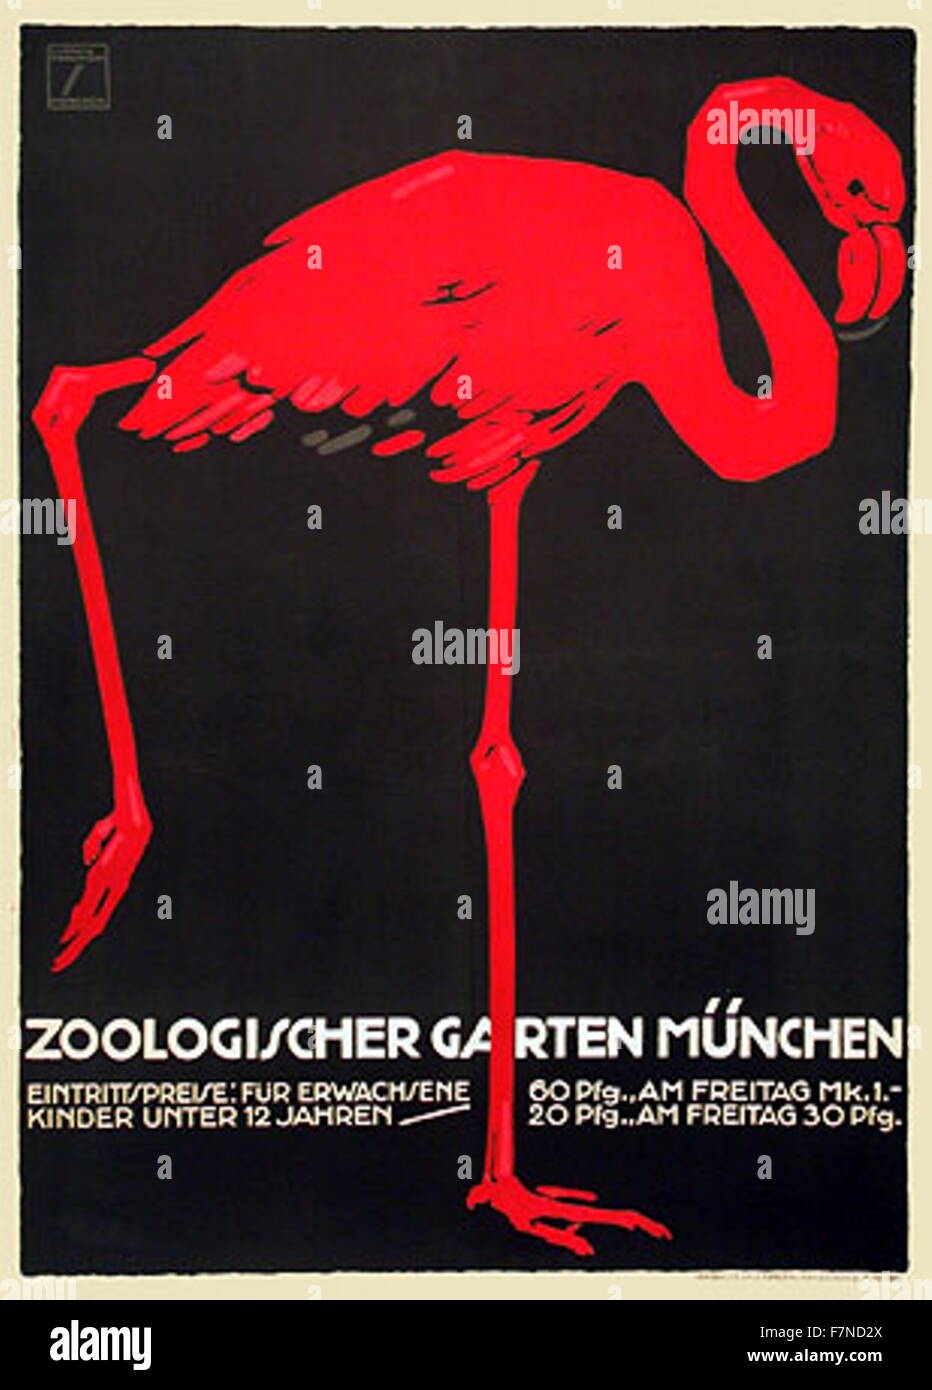 Ludwig Hohlwein, Zoo Poster with a red flamingo, 1925. Ludwig Hohlwein (27 July 1874 in Wiesbaden – 15 September 1949 in Berchtesgaden) was a German poster artist. He was trained and practiced as an architect until 1906, when he switched to poster design. Hohlwein's adaptations of photographic images was based on a deep and intuitive understanding of graphical principles. Stock Photo